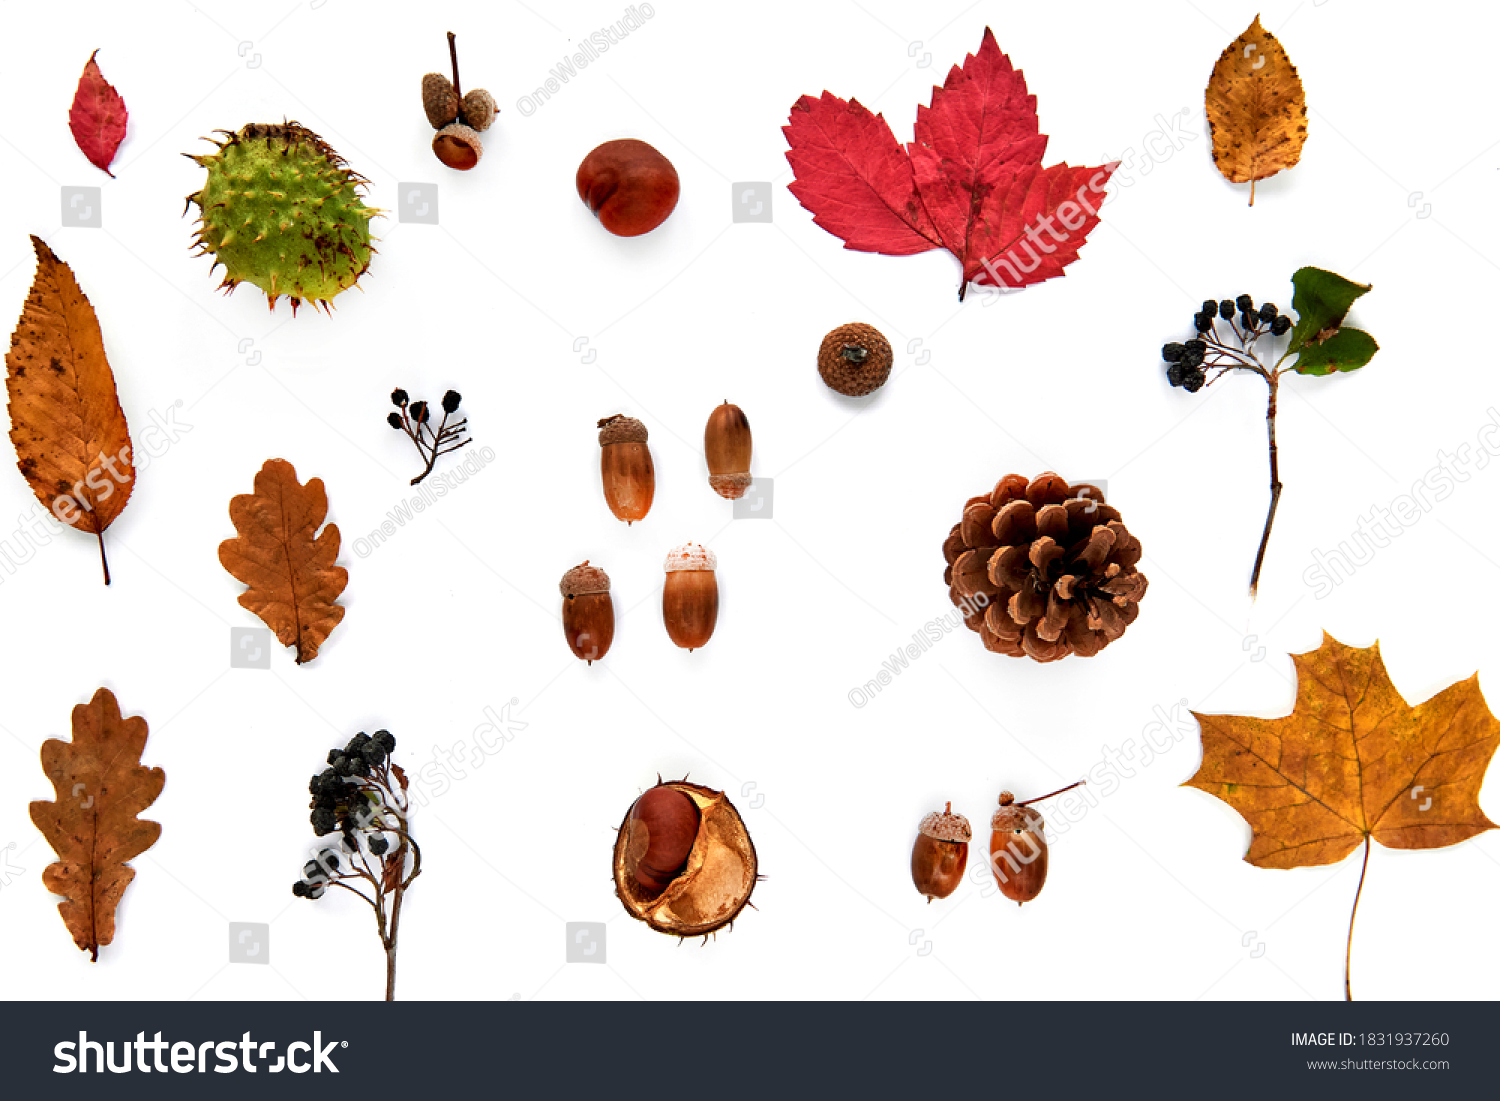 Autumn composition. Pattern made of dried leaves, branches, pine cones, berries, chestnuts and acorns isolated on white background. Template mockup fall, halloween. Flat lay, copy space background #1831937260